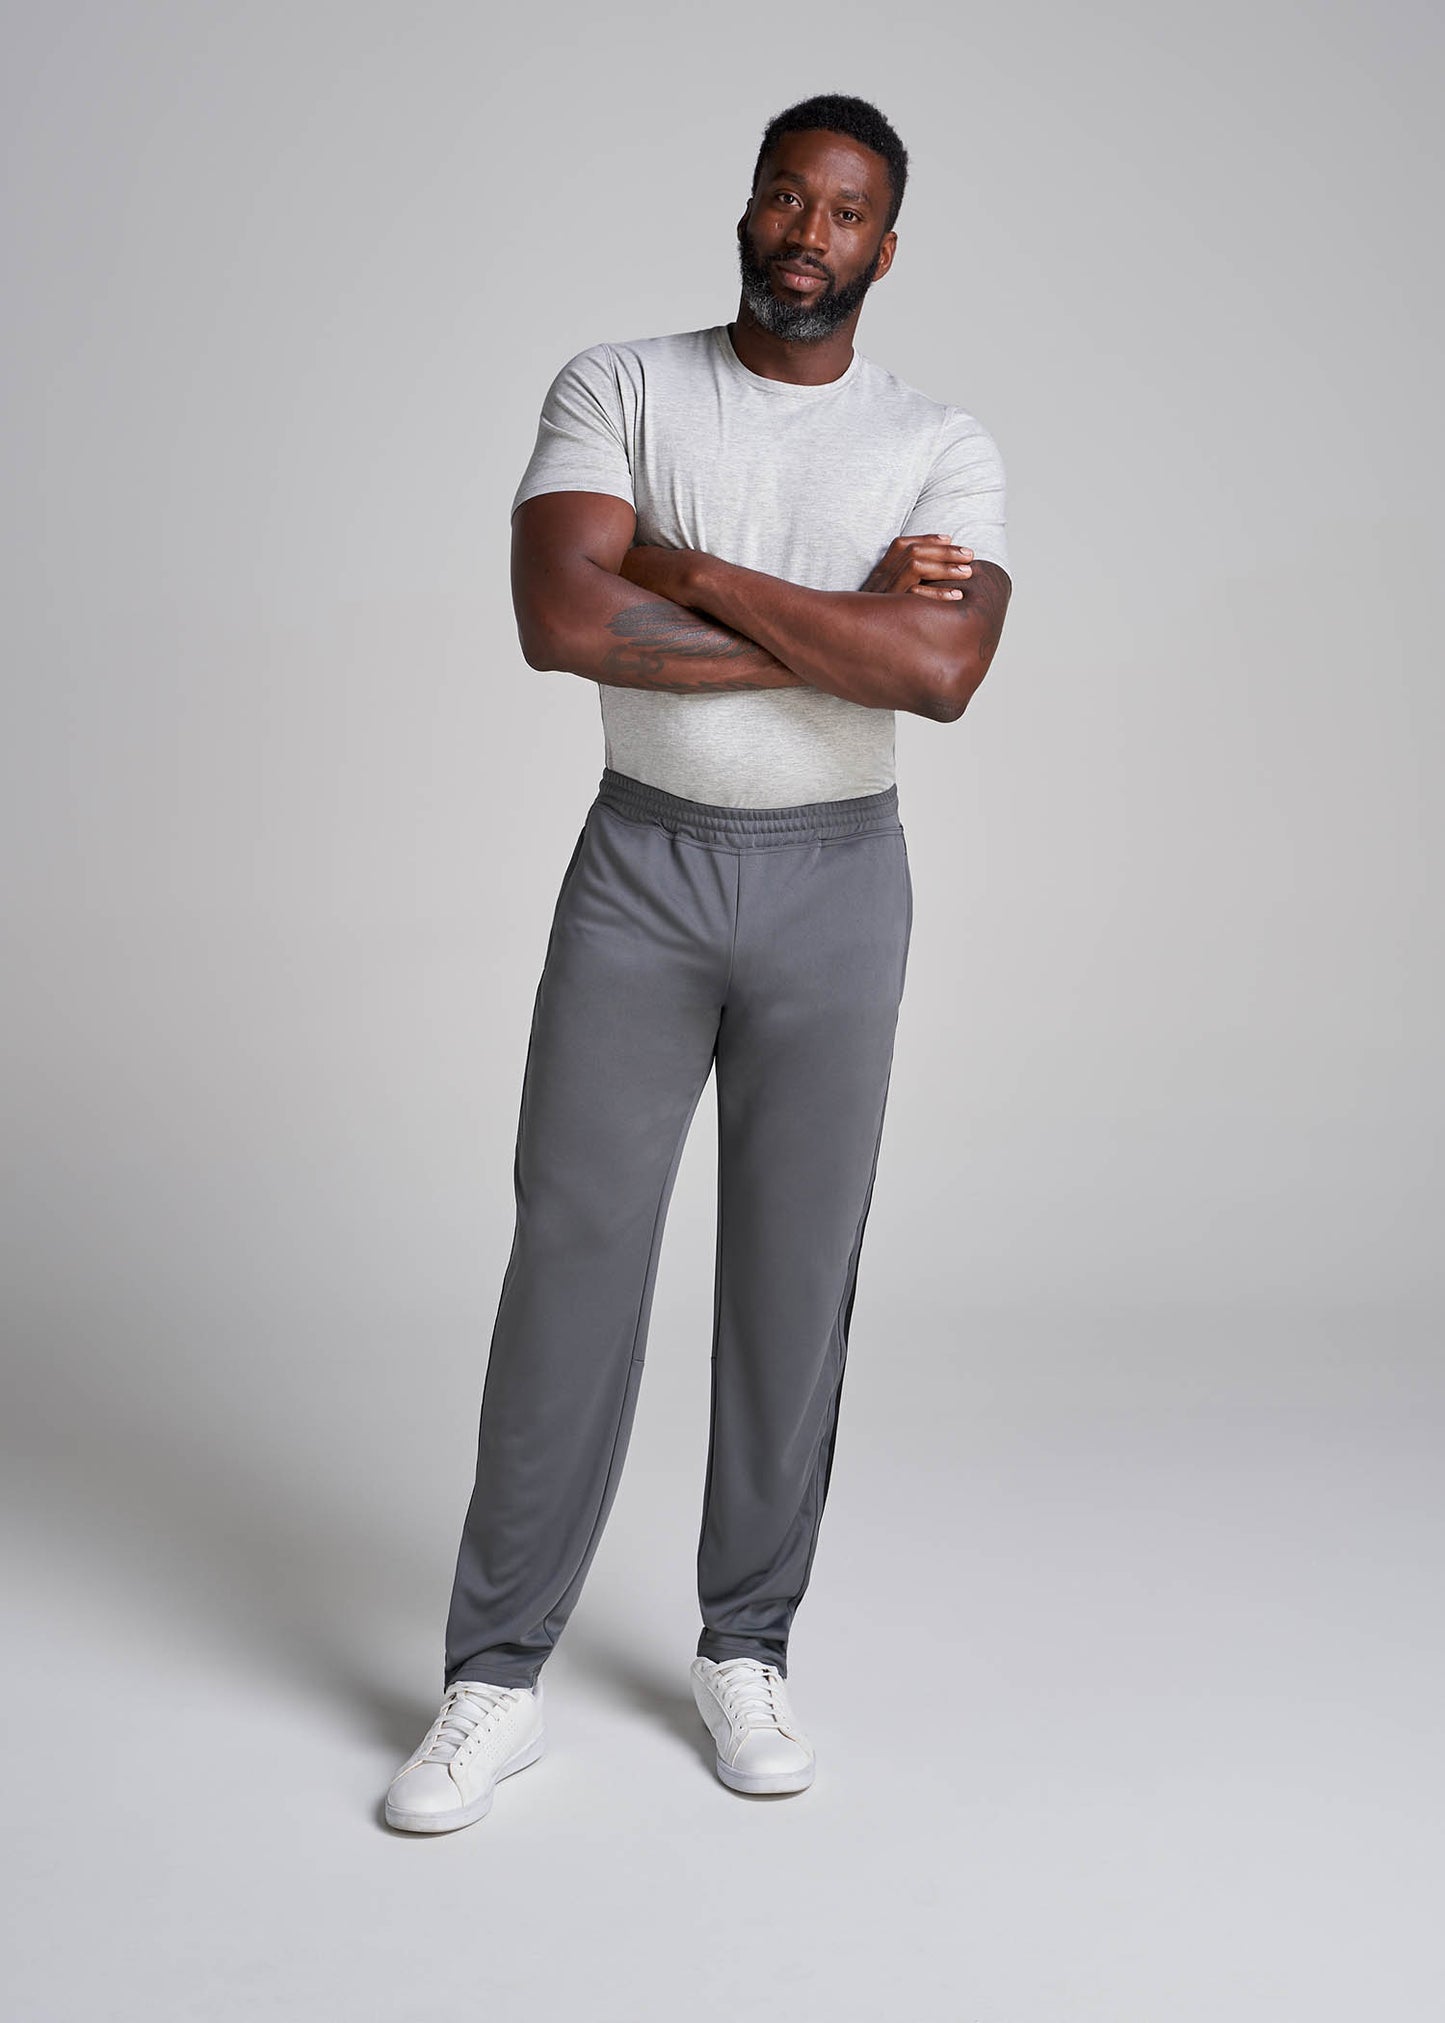 Athletic Stripe Pants for Tall Men in Black And Black